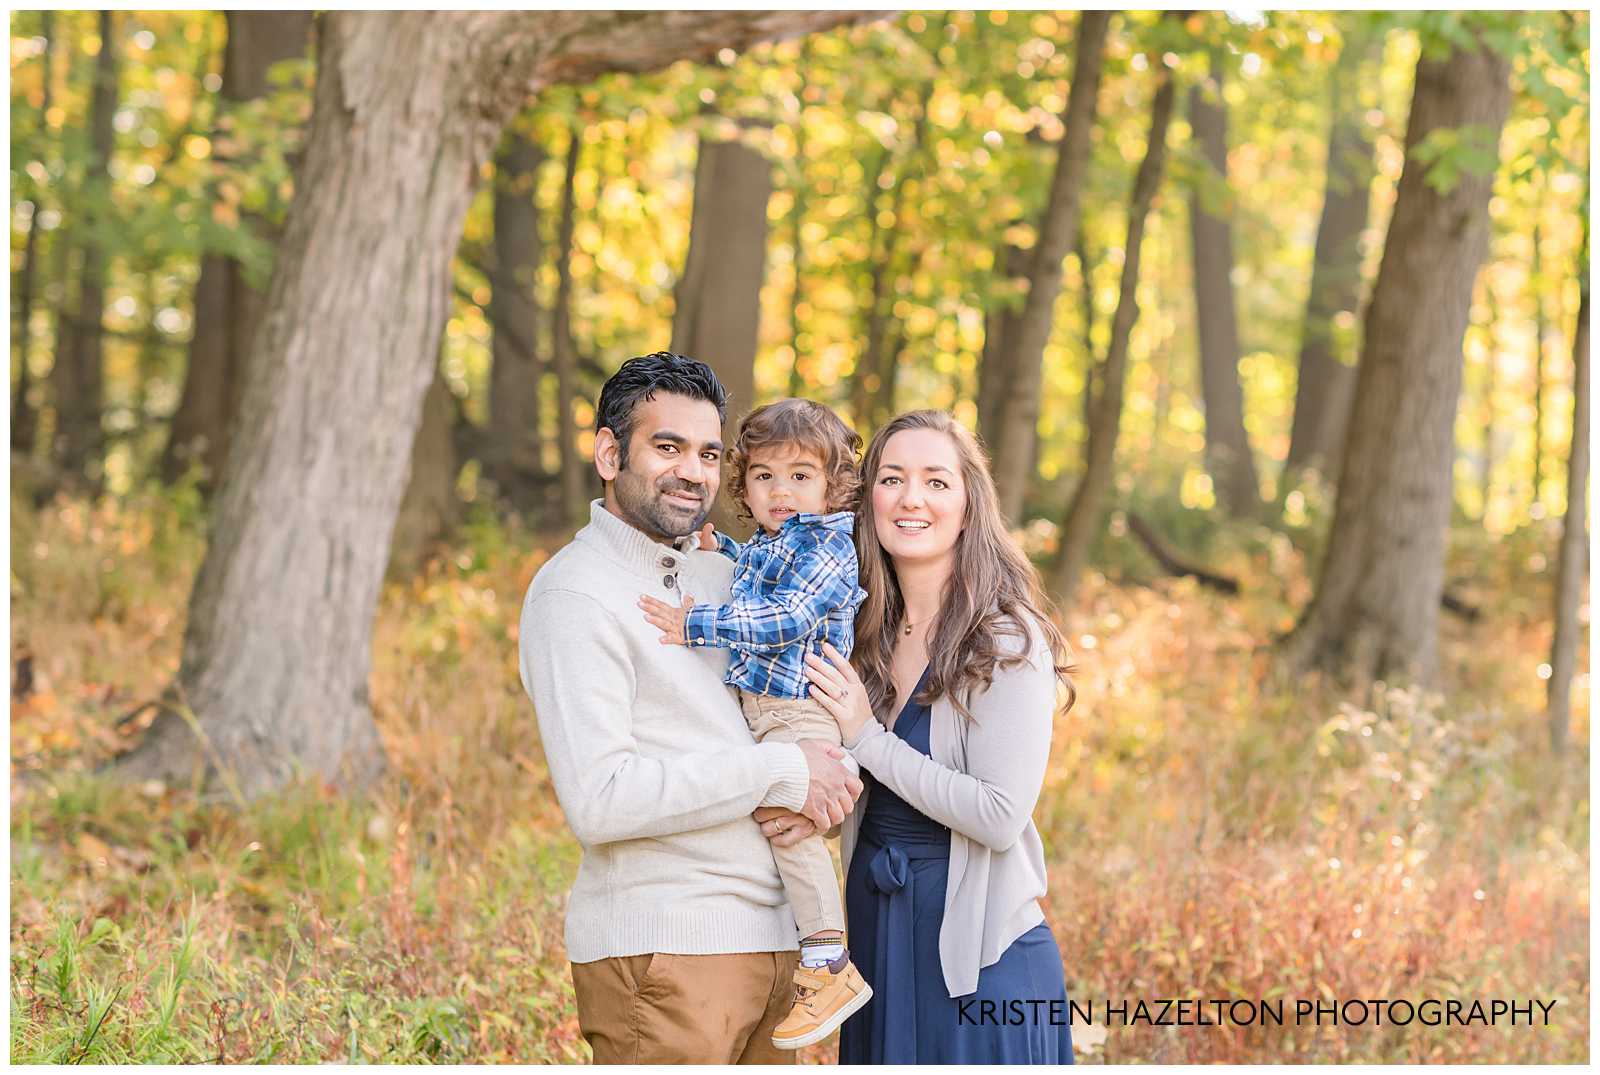 Fall family photo of three by River Forest, IL family photographer Kristen Hazelton